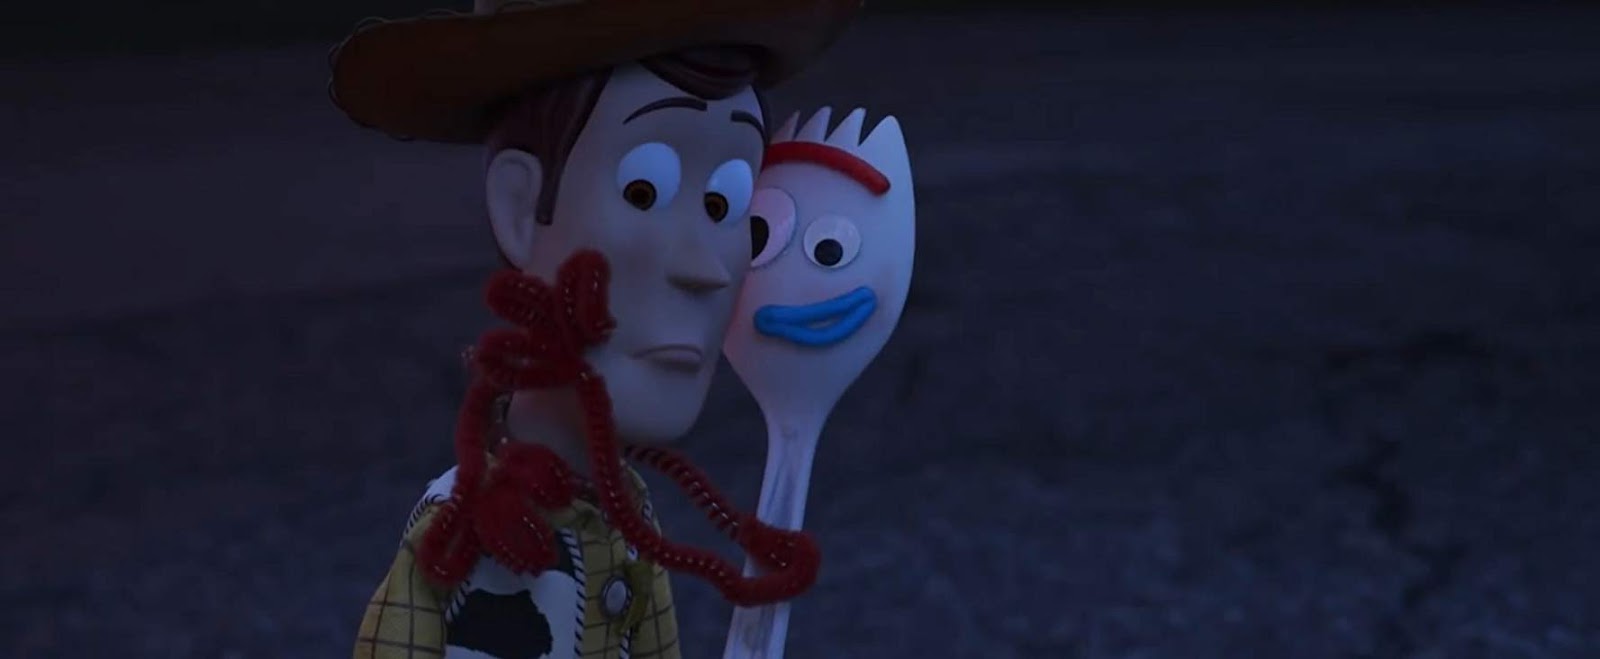 Movie still from Toy Story 4 with Tom Hanks as Woody and Tony Hale as Forky